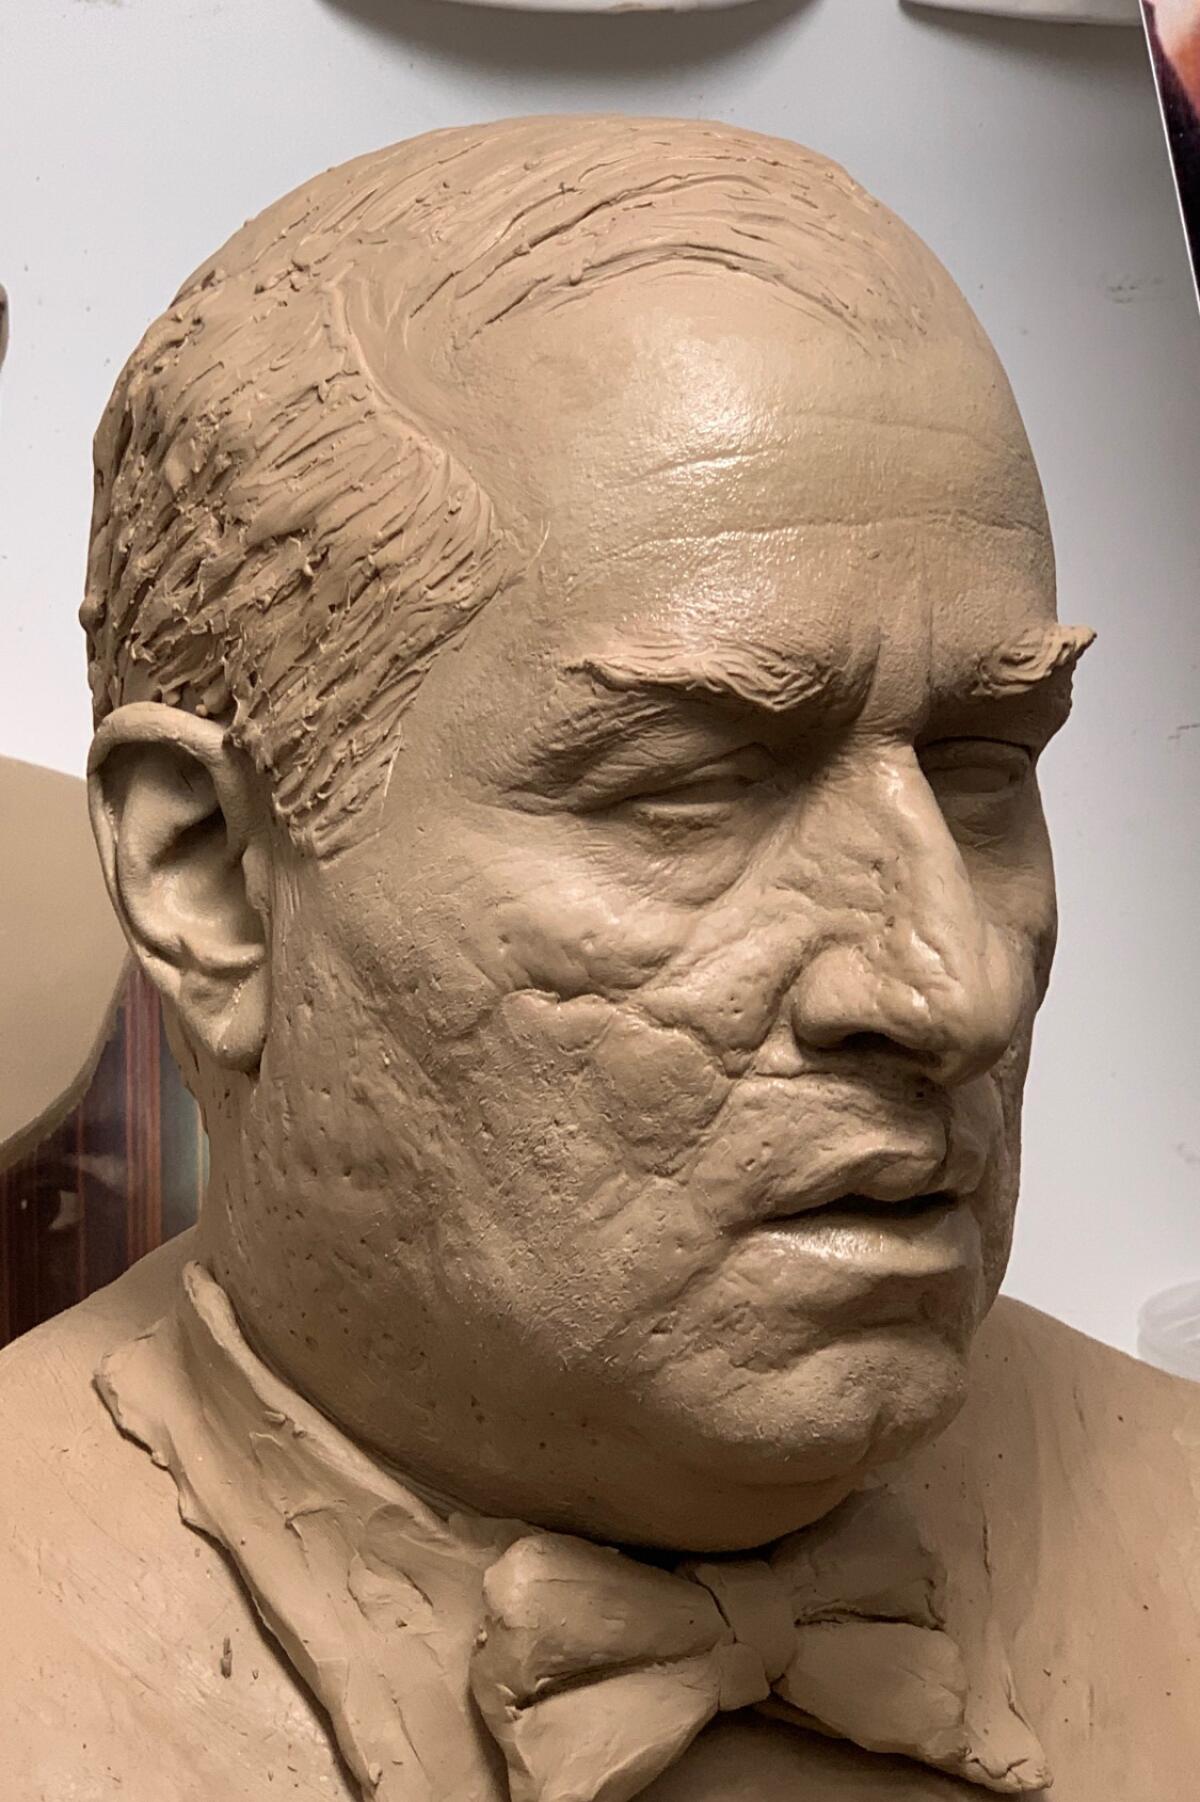 A bust depicts a balding man's scarred face in the negative for a prosthetic sculpture.